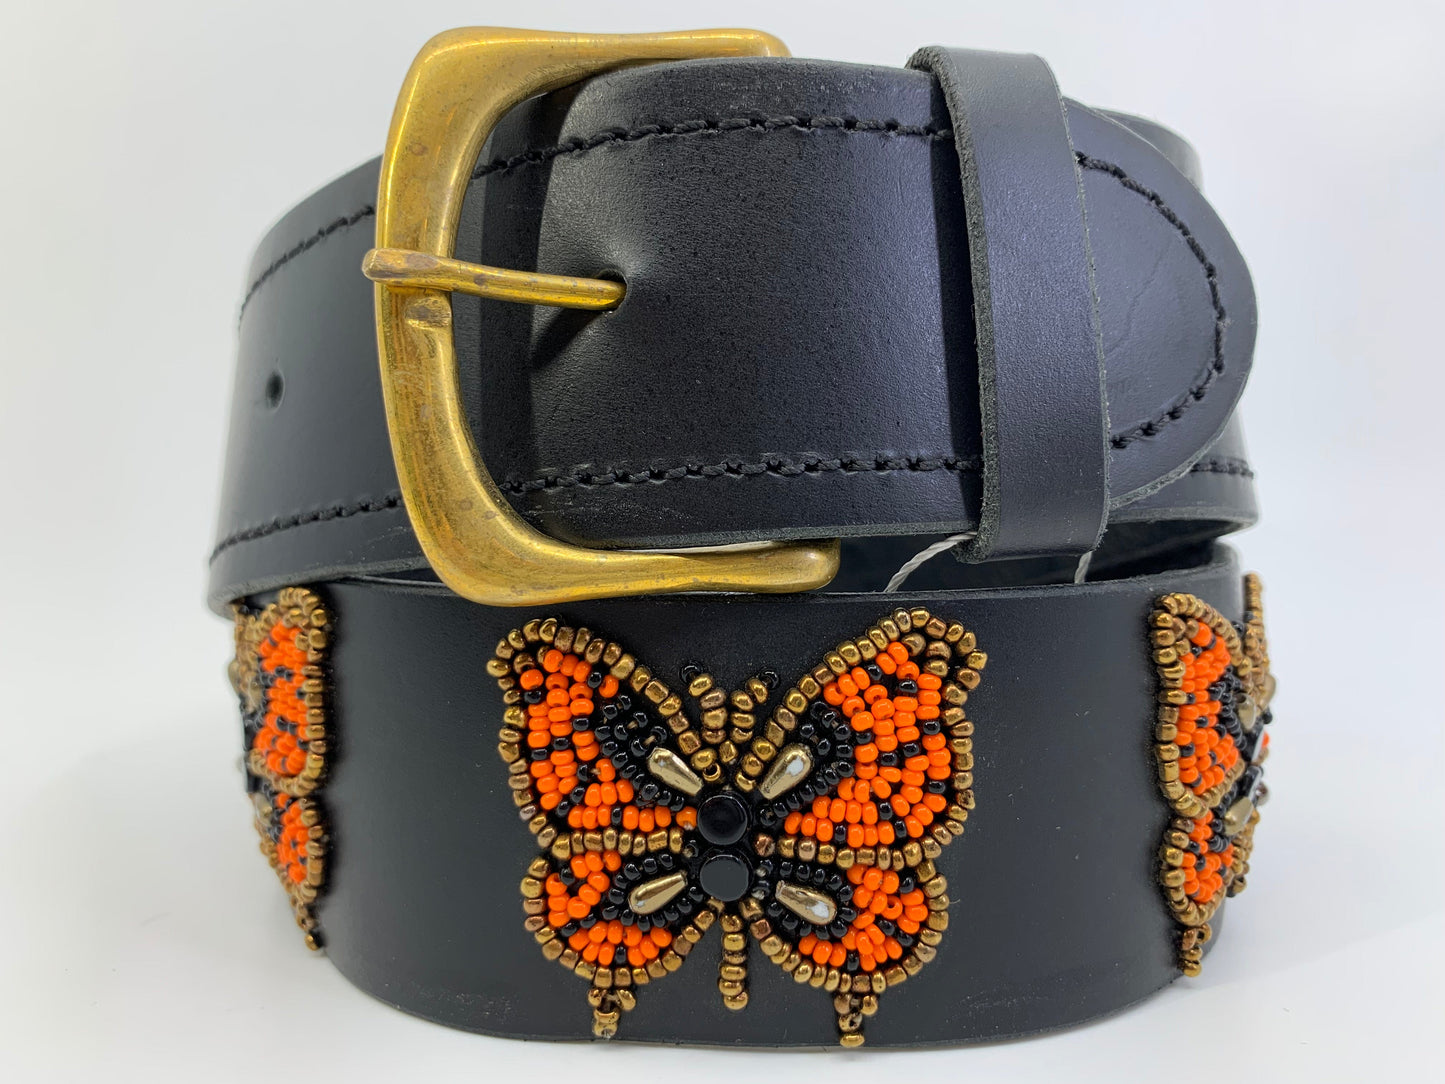 Equestrian Team Apparel Butterfly / XXS Beaded Belt- Assorted Designs equestrian team apparel online tack store mobile tack store custom farm apparel custom show stable clothing equestrian lifestyle horse show clothing riding clothes horses equestrian tack store